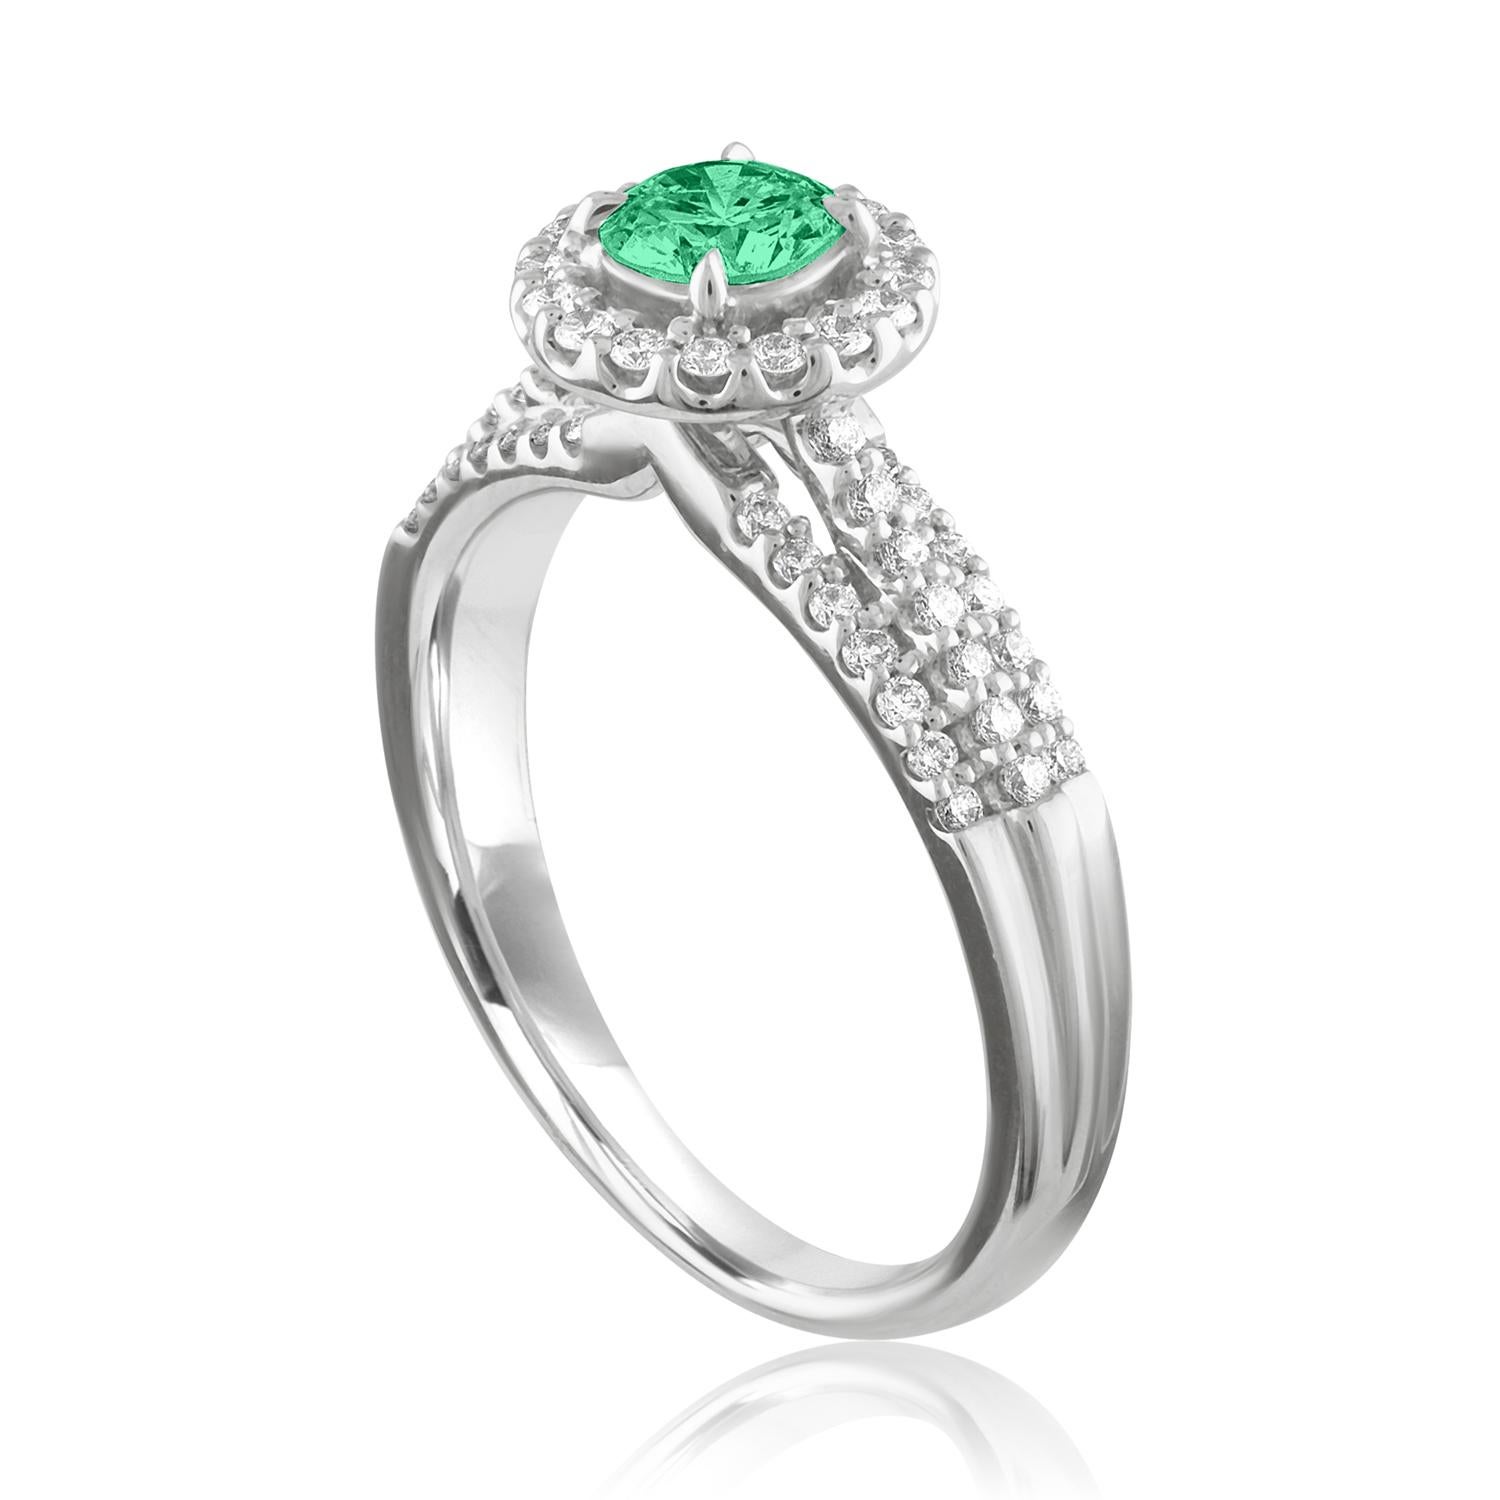 Beautiful Diamond & Emerald Halo Ring
The ring is 18K White Gold.
There are 0.35 Carats in Diamonds F/G VS/SI
The Center is Round 0.38 Carat Emerald.
The Emerald is AGL certified.
The ring is a size 6.75, sizable.
The ring weighs 4.3 grams.